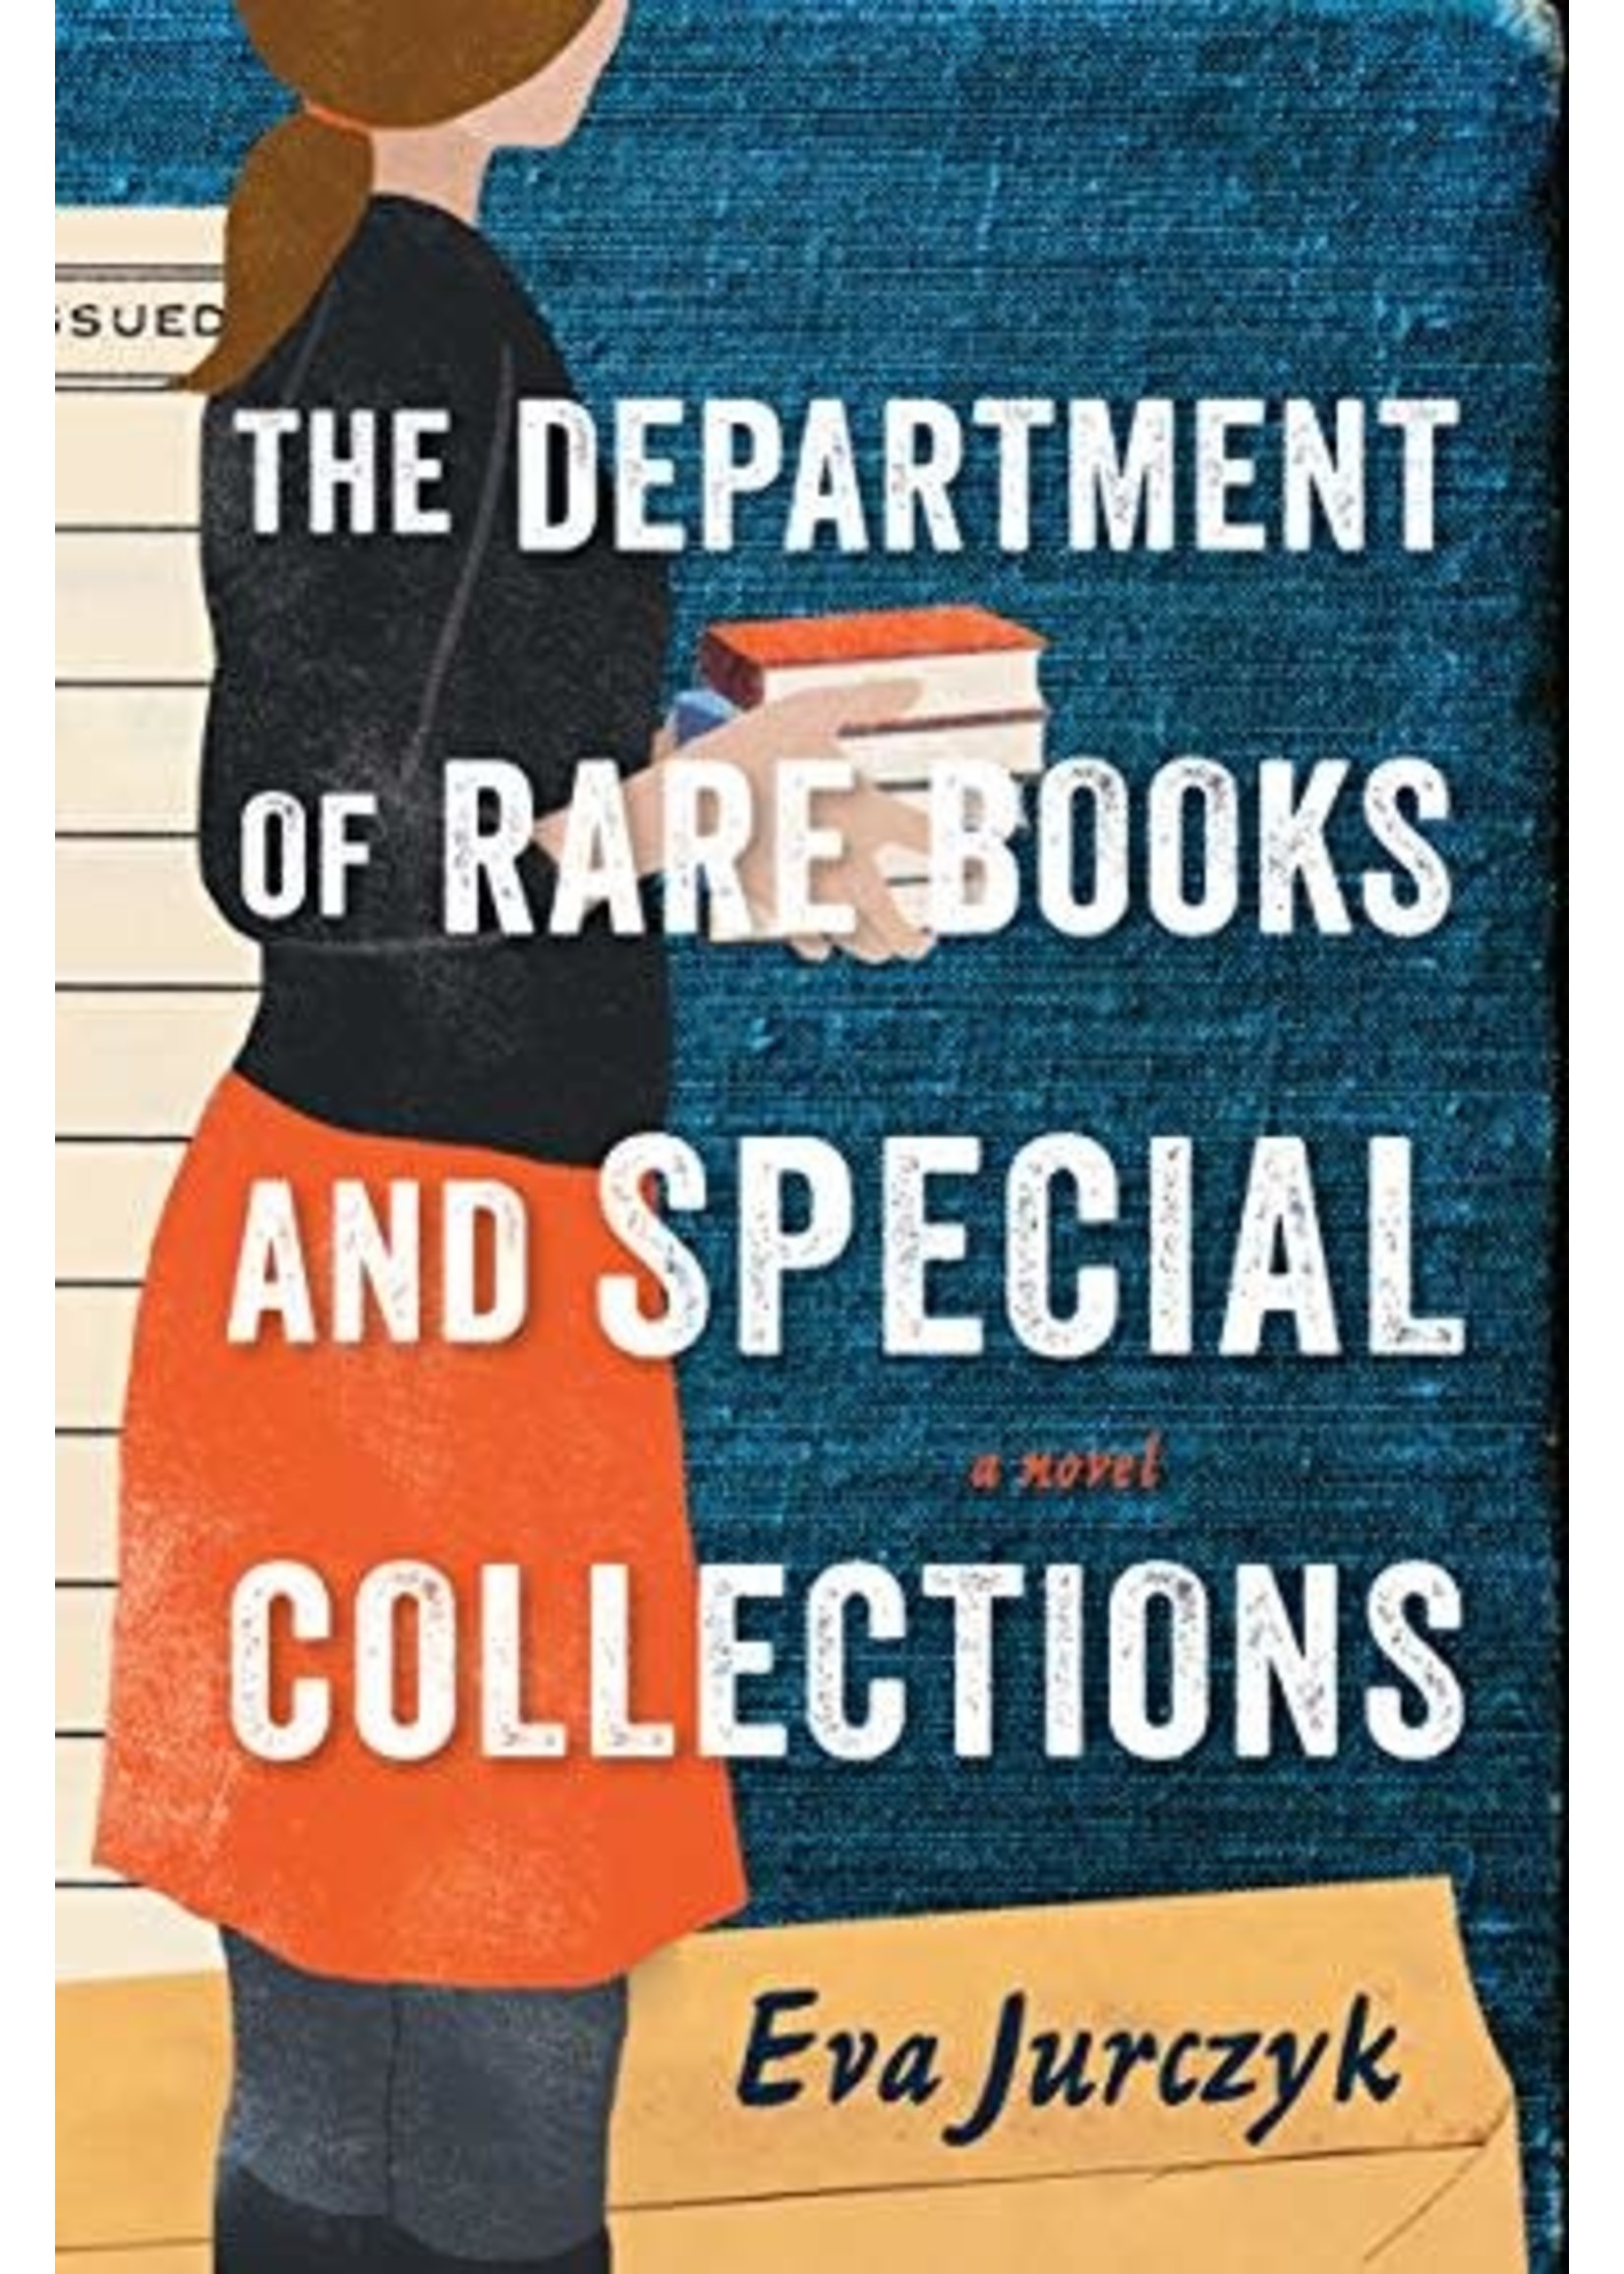 The Department of Rare Books and Special Collections by Eva Jurczyk